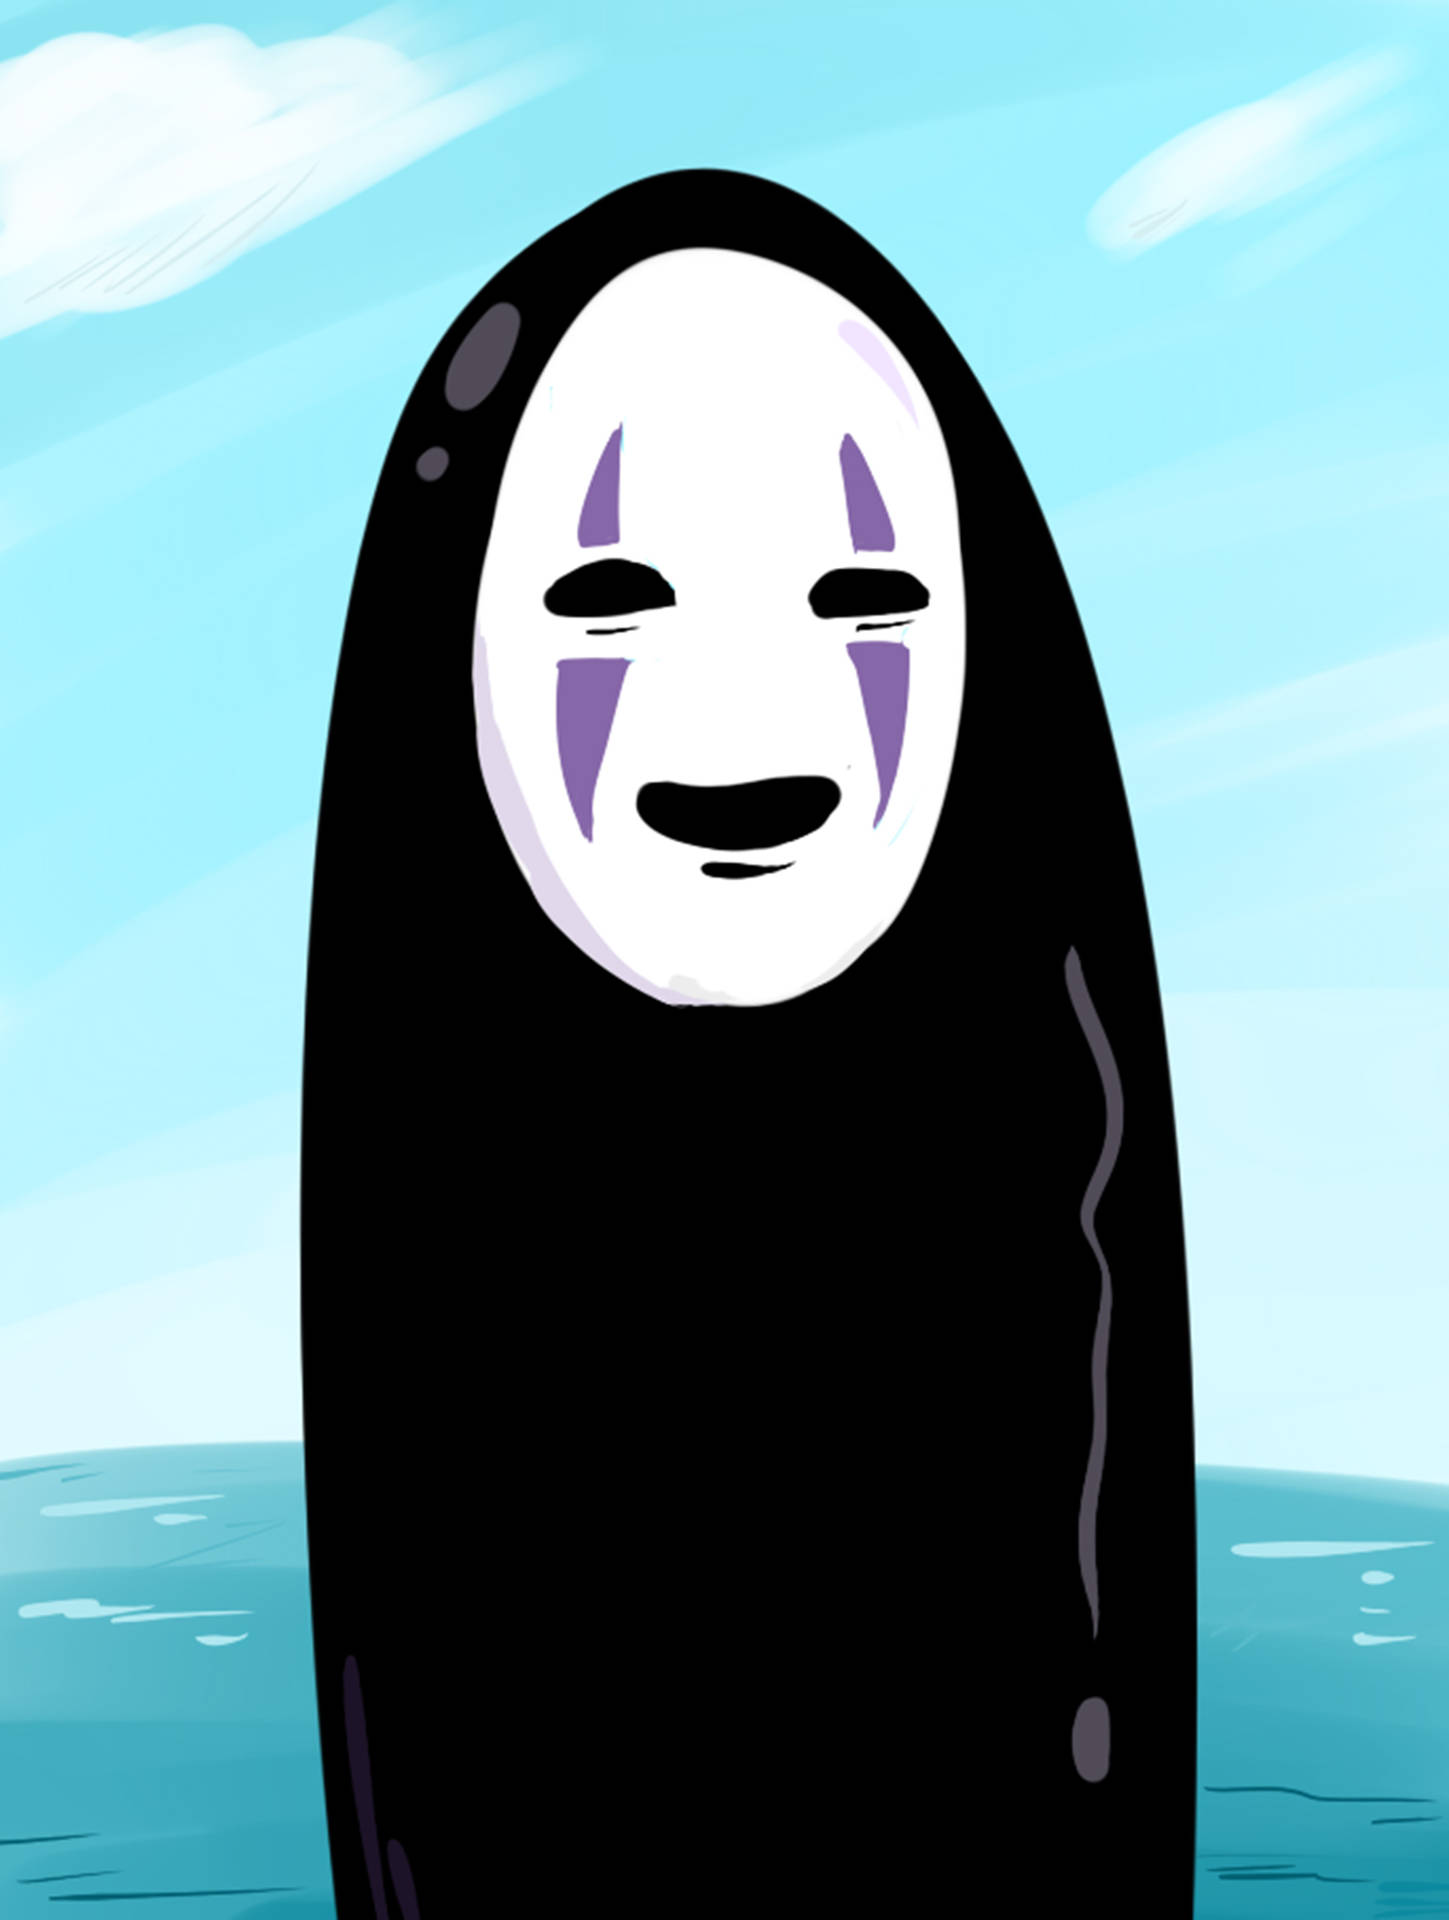 Cheery No-face Artwork Background